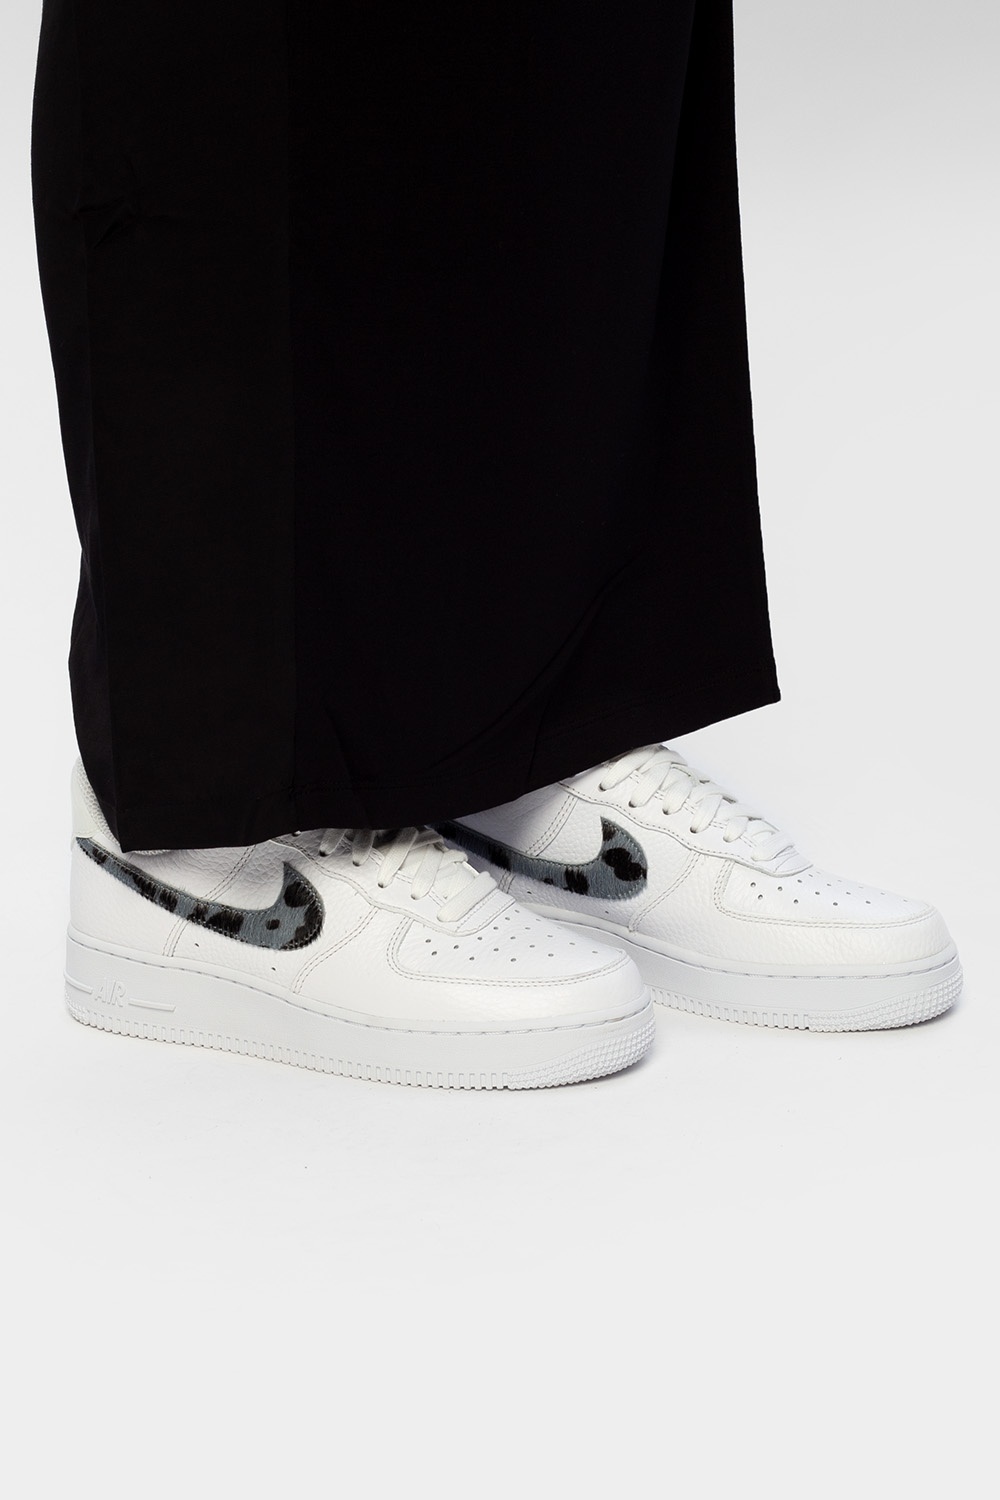 Find The Perfection In Imperfection With This Nike Air Force 1 LV8